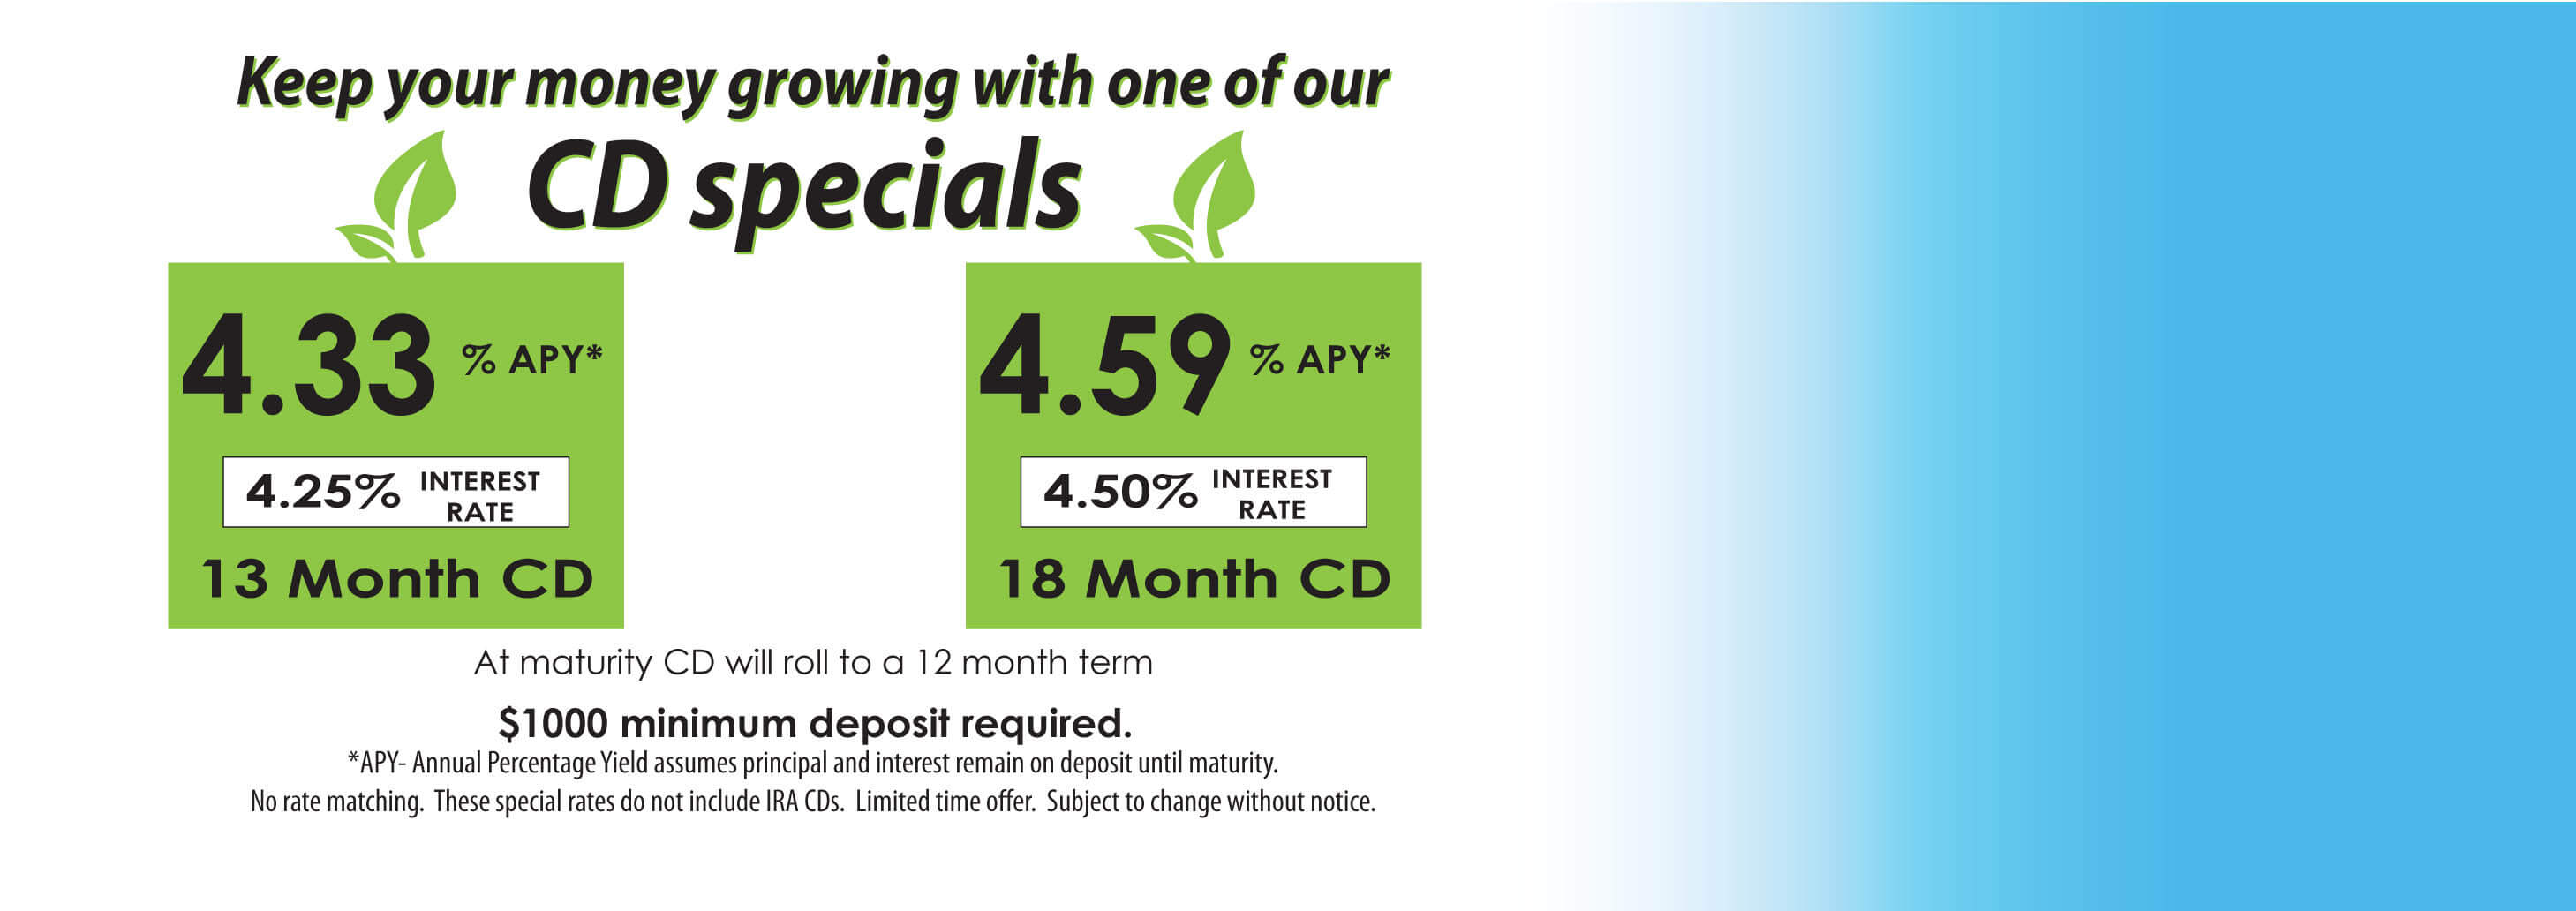 Keep your money growing with one of our CD specials 4.00% apy* 3.93% interest reate 12 month cd 4.25% apy* 4.17% interest rate 18 month cd at maturity cd will roll to a 12 month ter, $1000 minimum deposit required. @apy-annual percentage yield assumes principal and interest remain on deposit until maturity. No rate matching. These specials rates do not include IRA CDs. Limited time offer. Subject to change without notice.